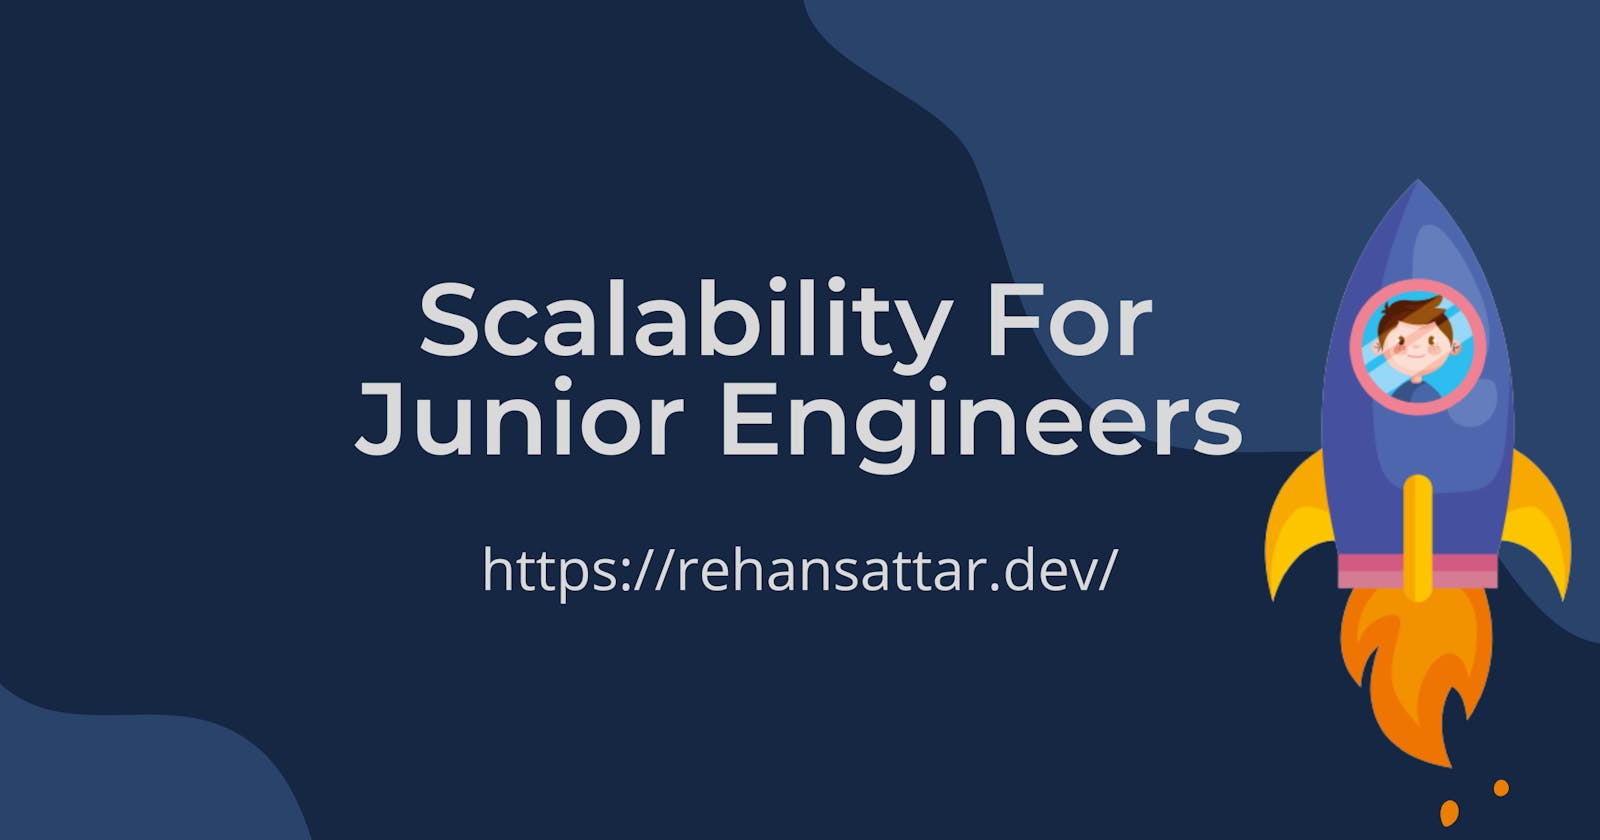 Scalability For Junior Engineers